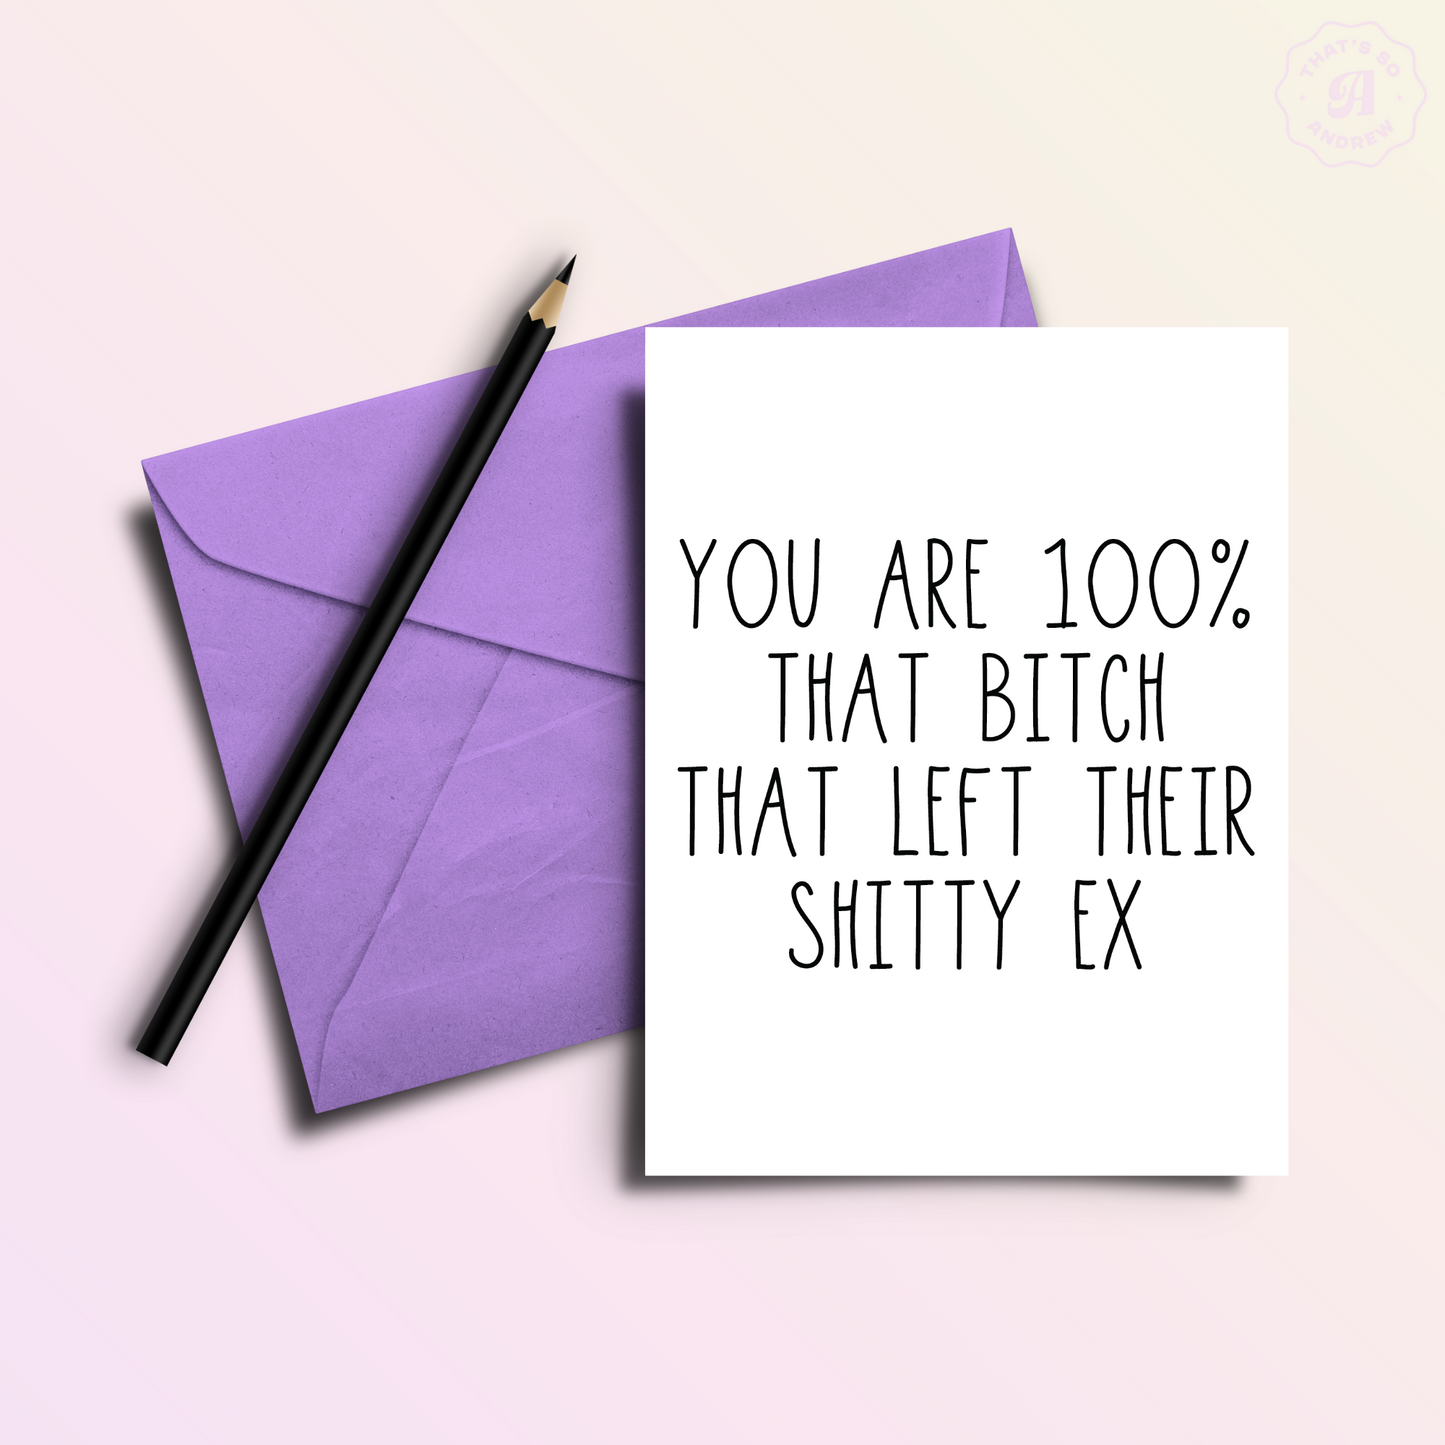 That Bitch that Left | Divorce Breakup Hard Times Greeting Card